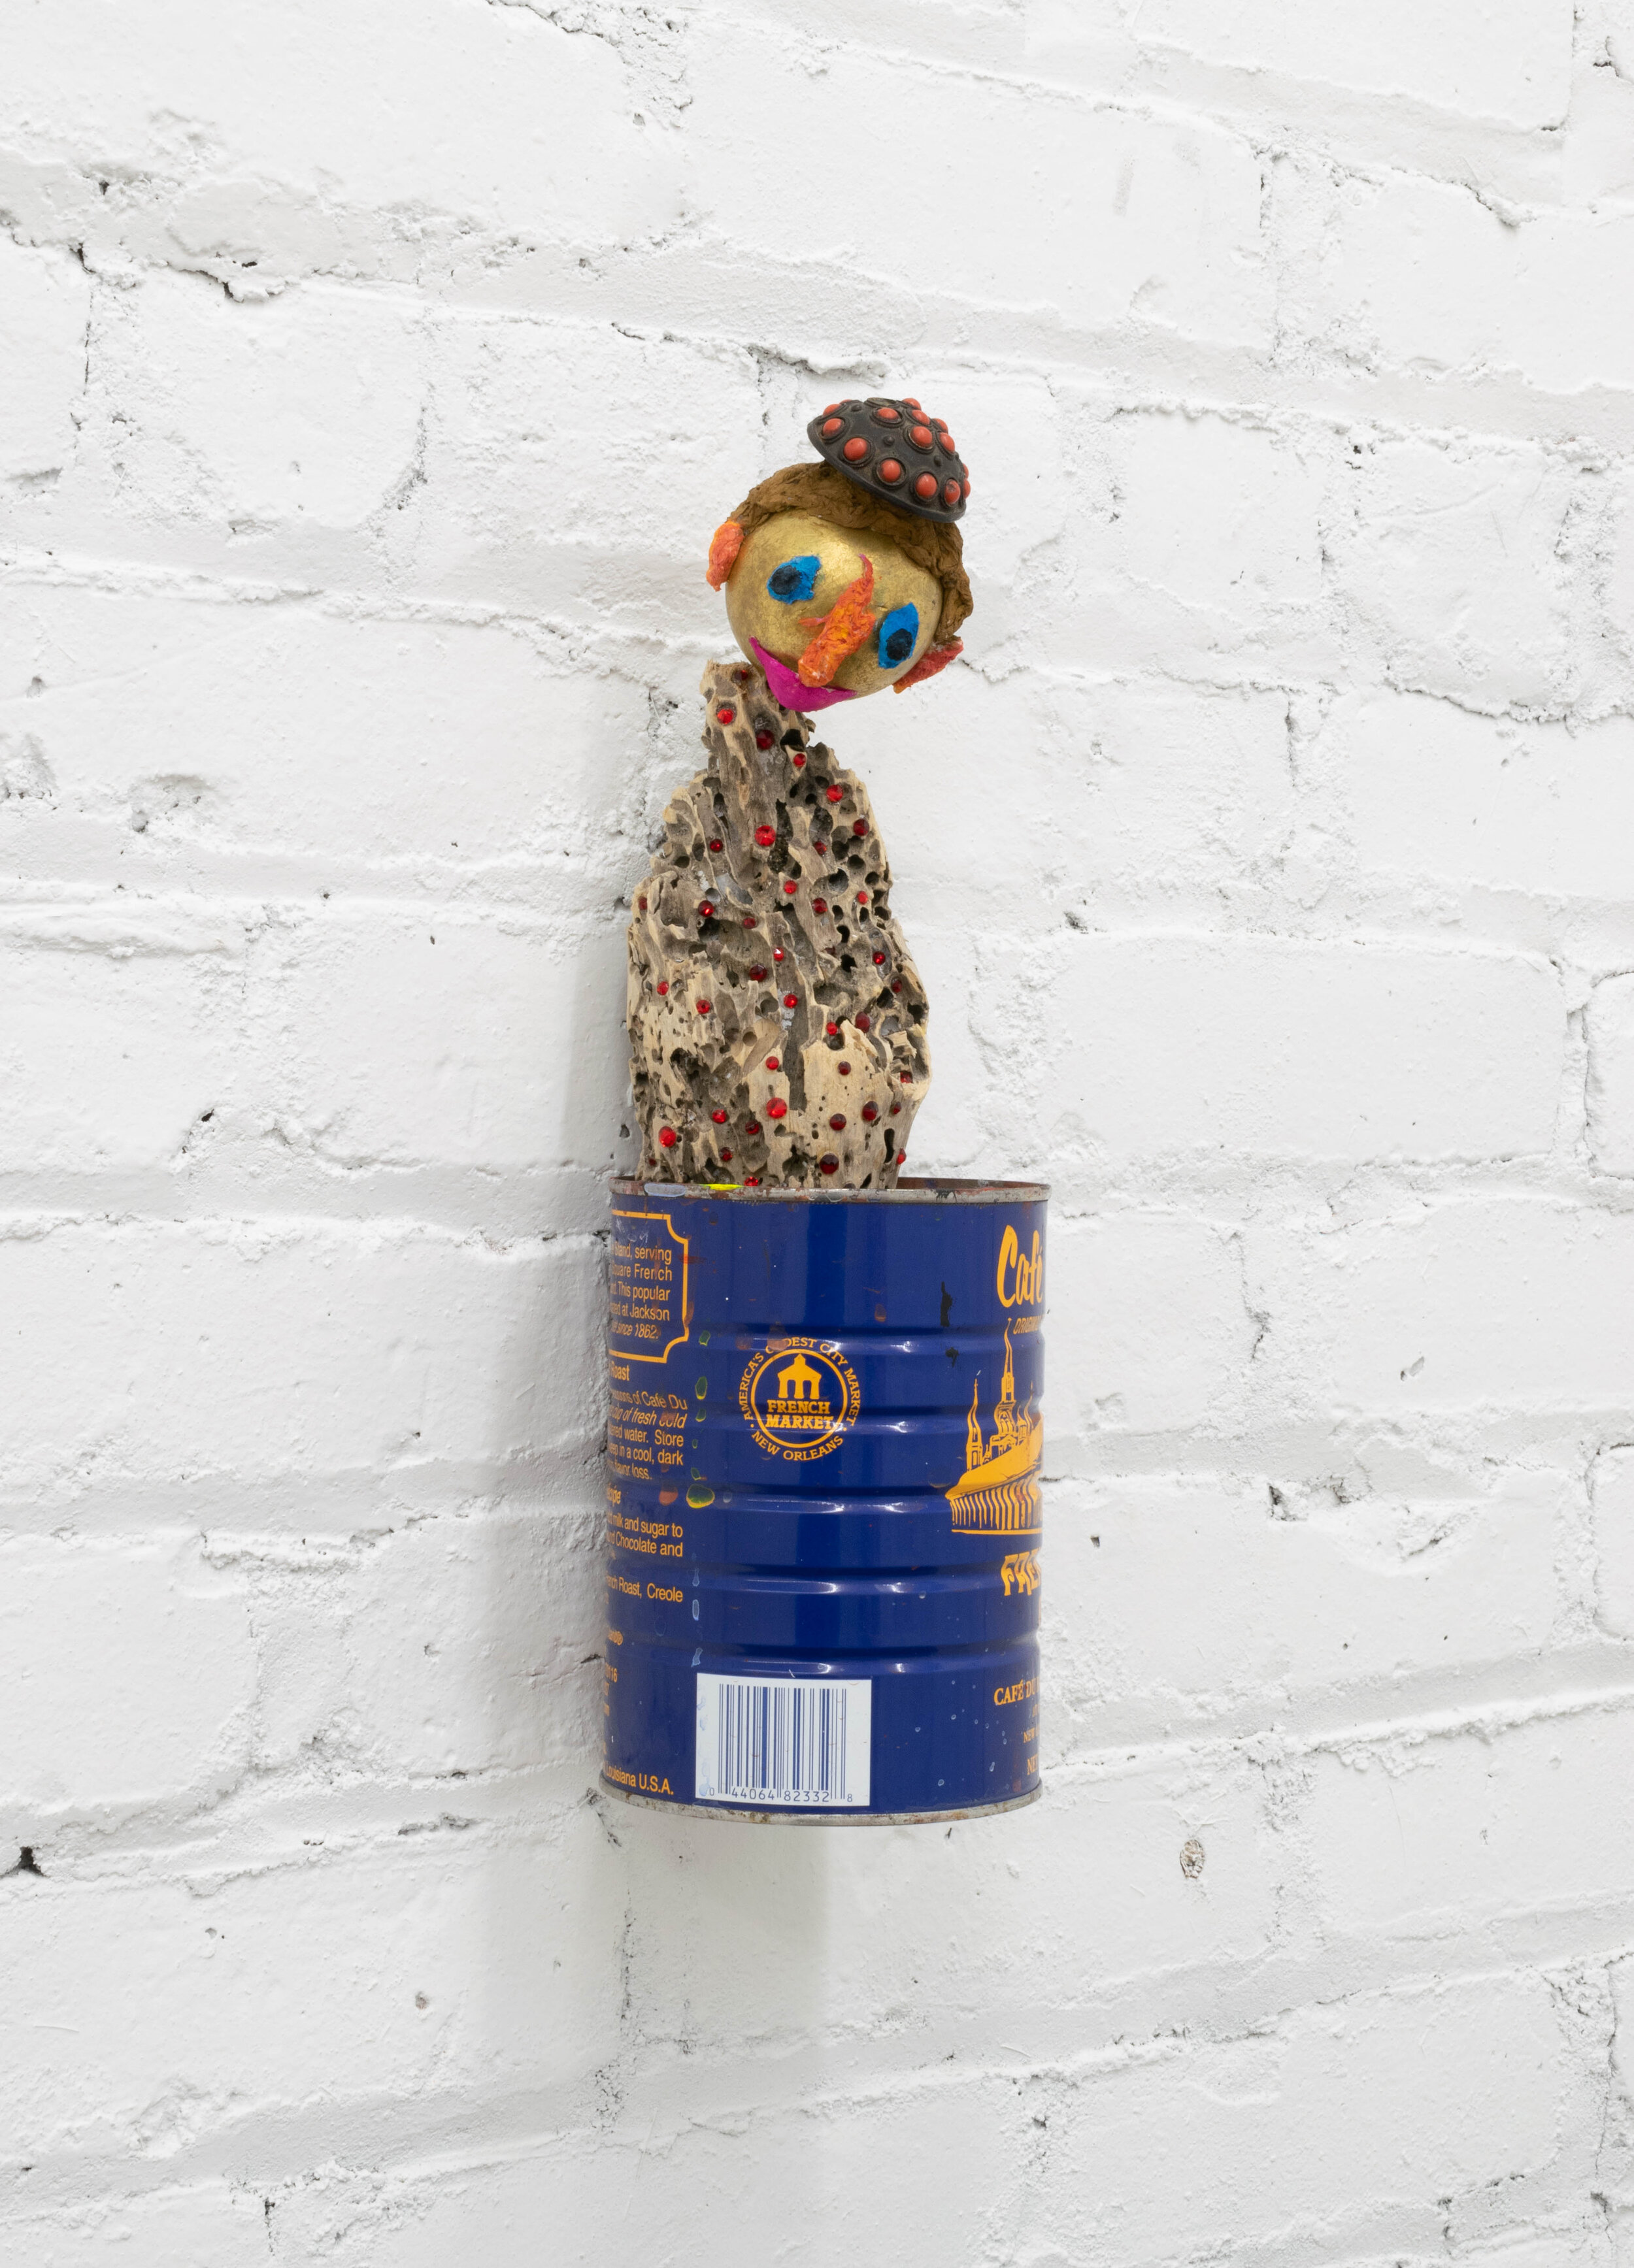 Du Monde, 2019, drift wood, coffee can, swarovski crystals, gold leaf on wood, gouache, toilet paper, 19th century Chinese coral and brass snuff bottle top, 12 x 4 x 4 inches